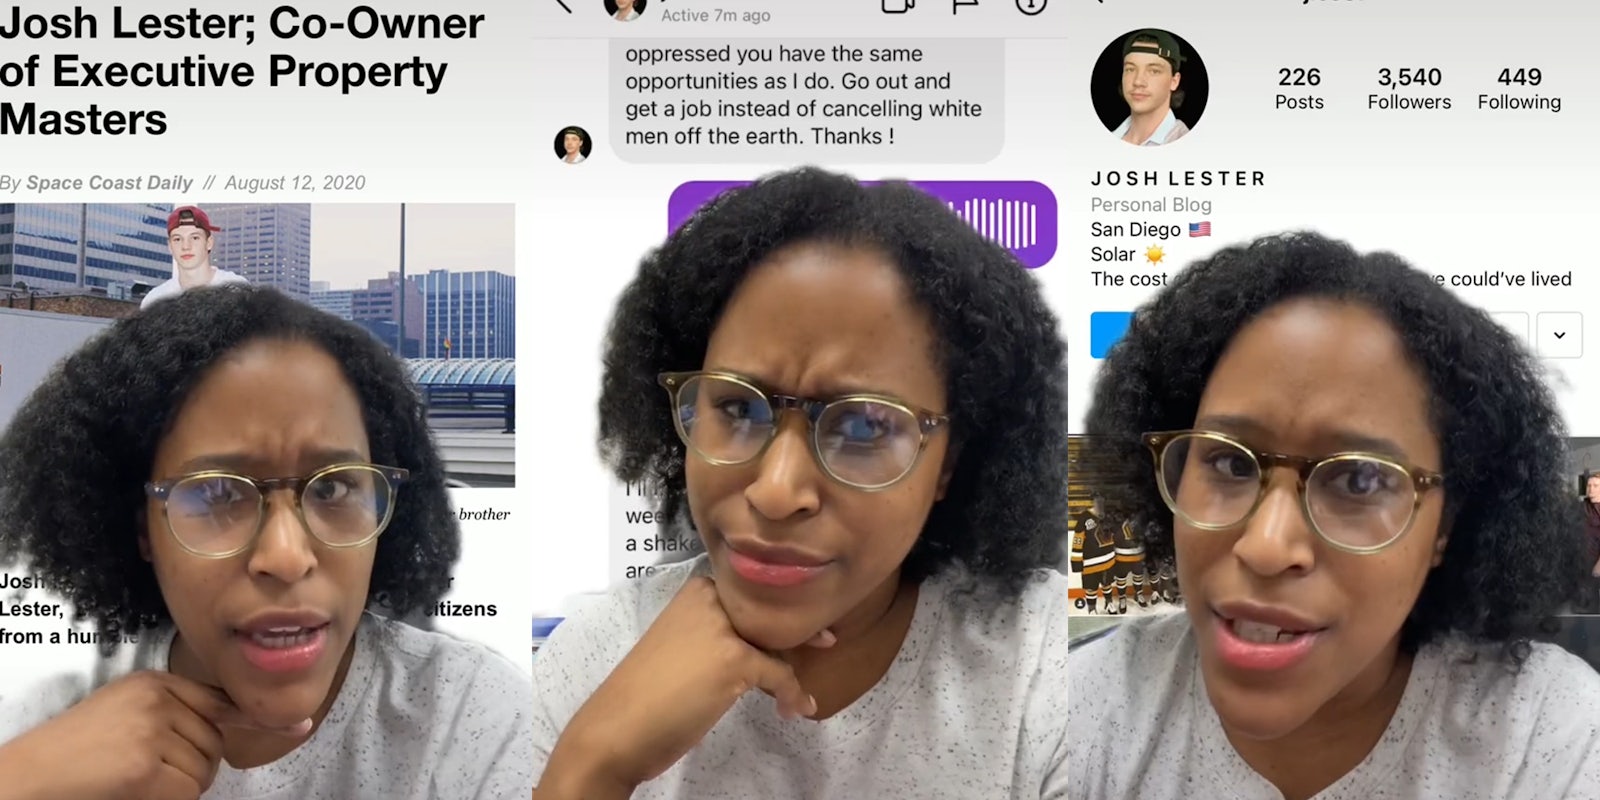 Woman speaking in front of website backgrounds. 'Josh Lester; Co-Owner of Executive Property Masters' (l) 'oppressed you have the same opportunities as I do. Go out and get a job instead of cancelling white men off the earth. Thanks !' (c) Josh Lester personal blog (r)